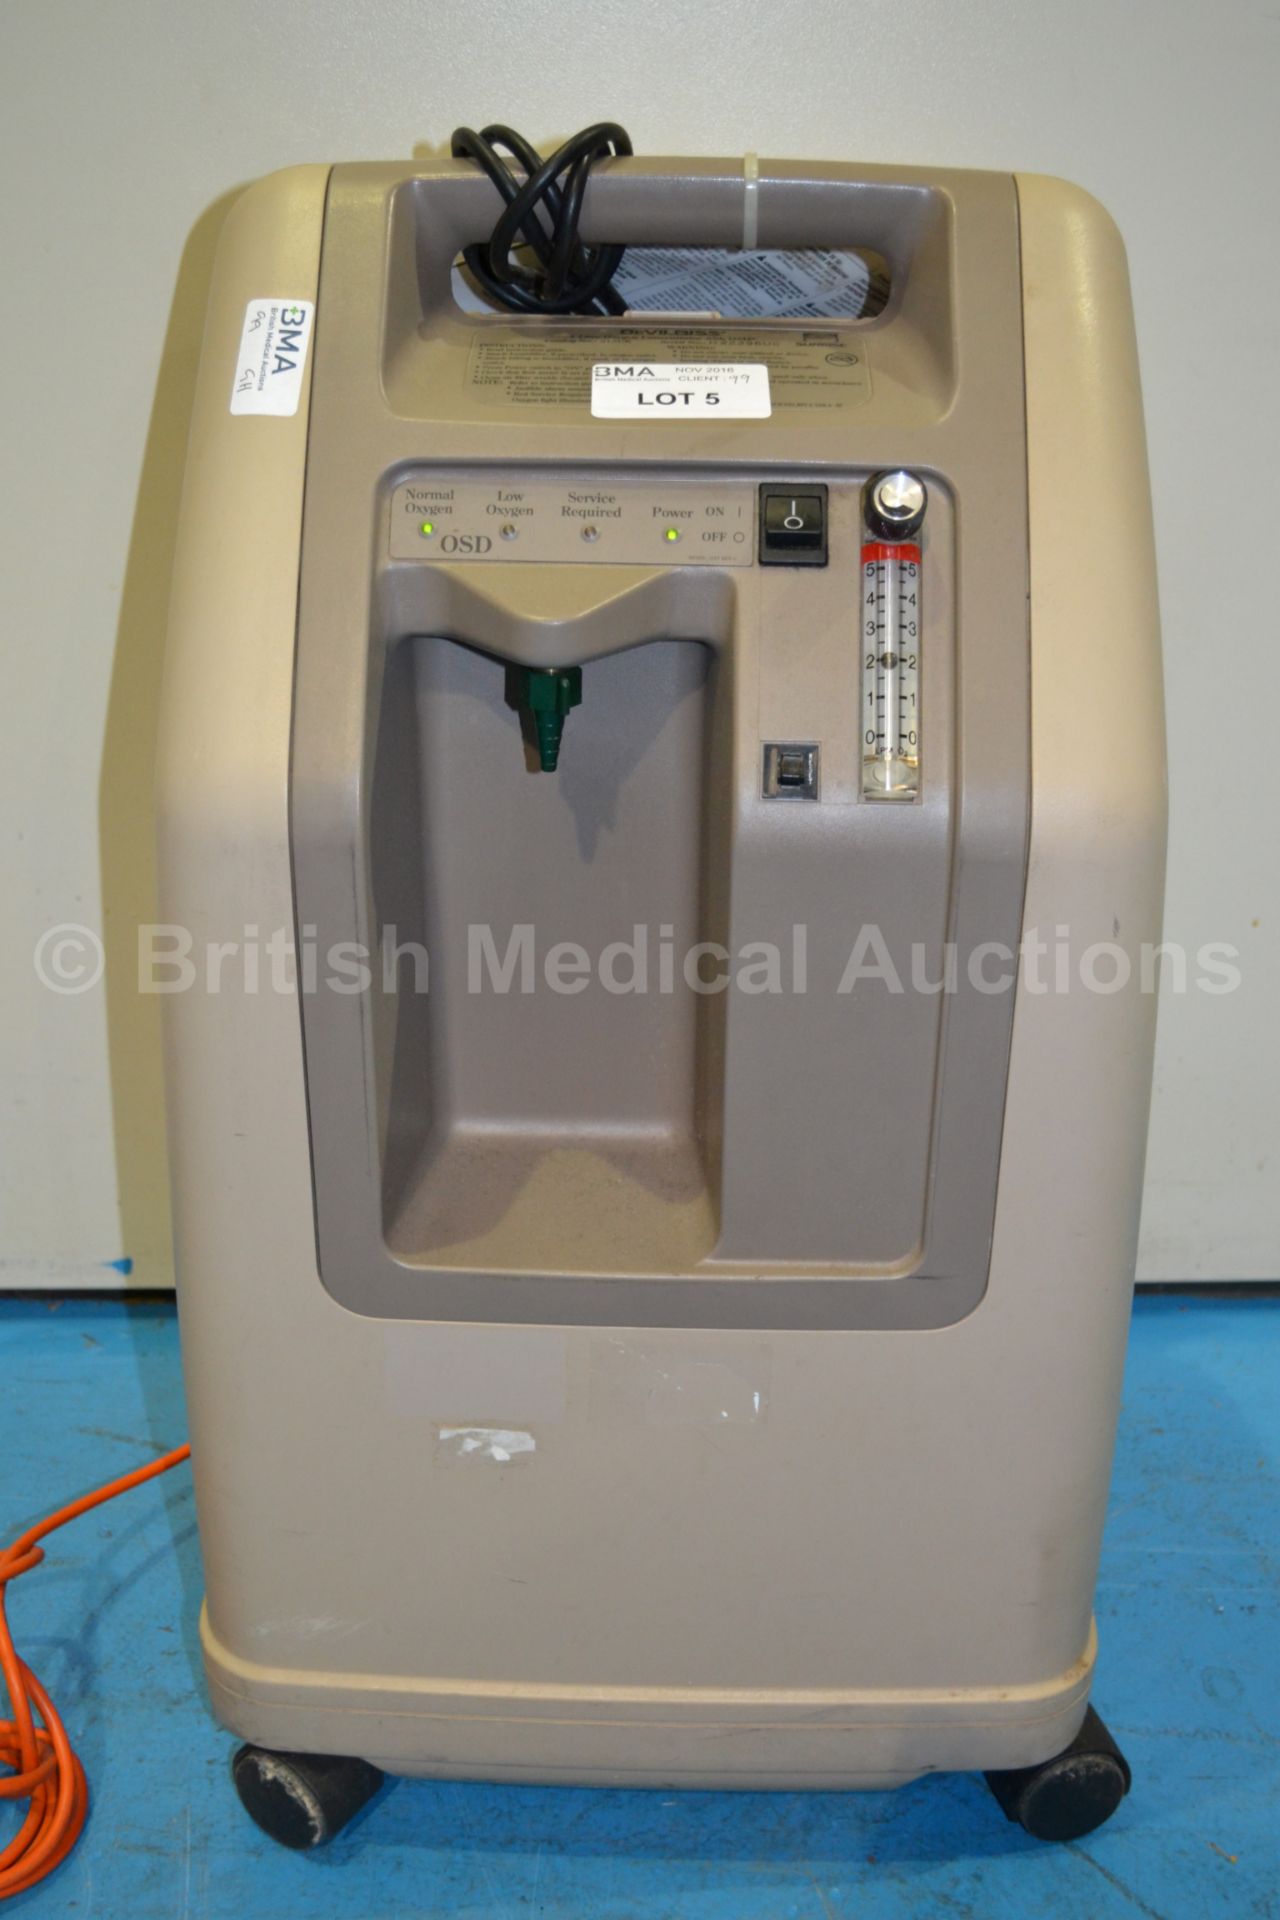 DeVilbiss 4 Litre Oxygen Concentrator with OSD (Po - Image 2 of 3